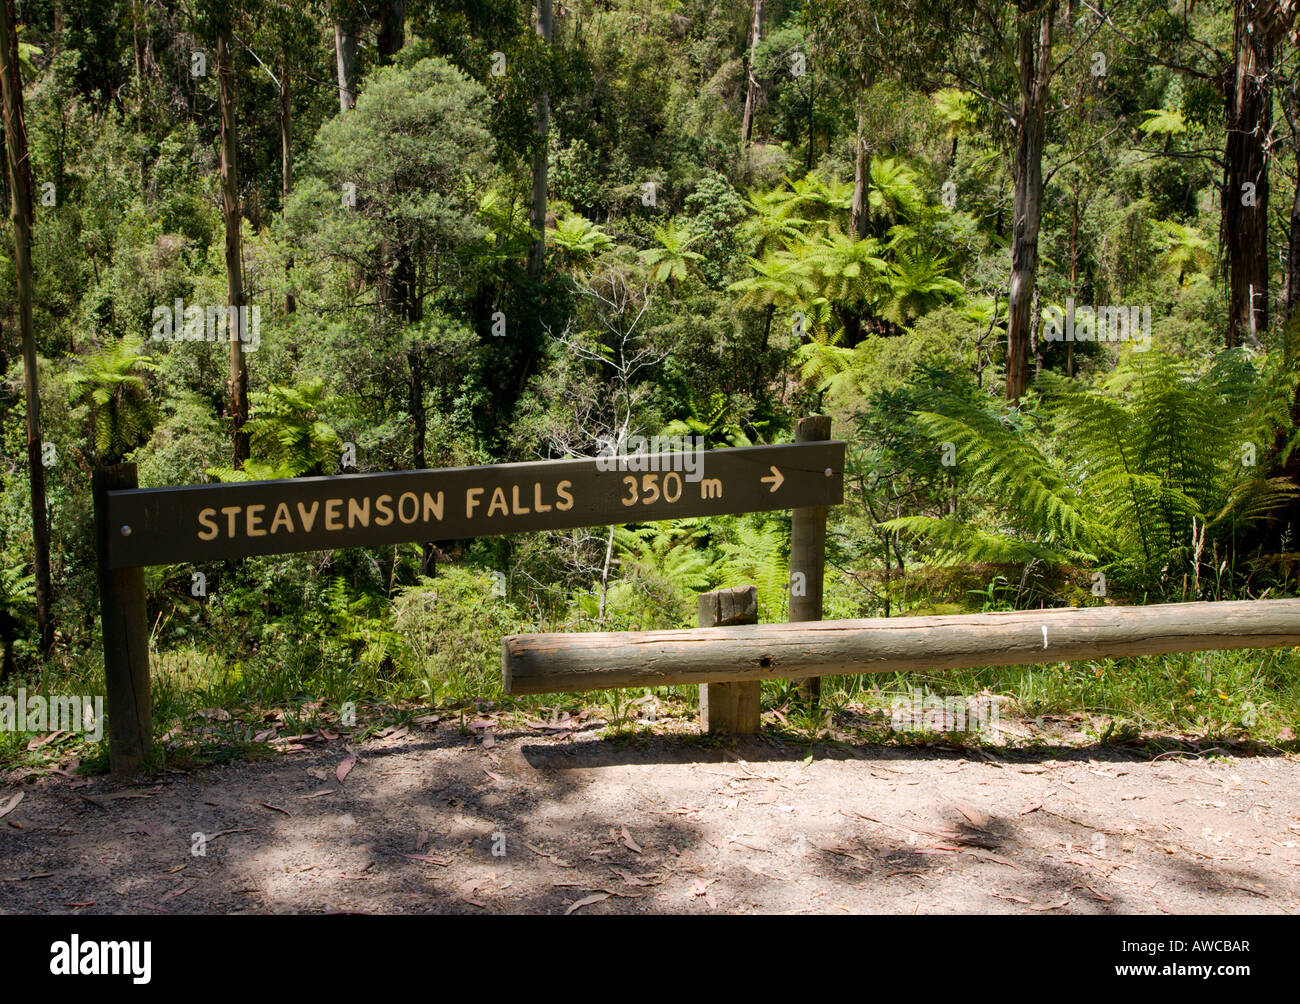 A sign pointing and advising the distance to steavenson falls in Victoria Australia. Stock Photo